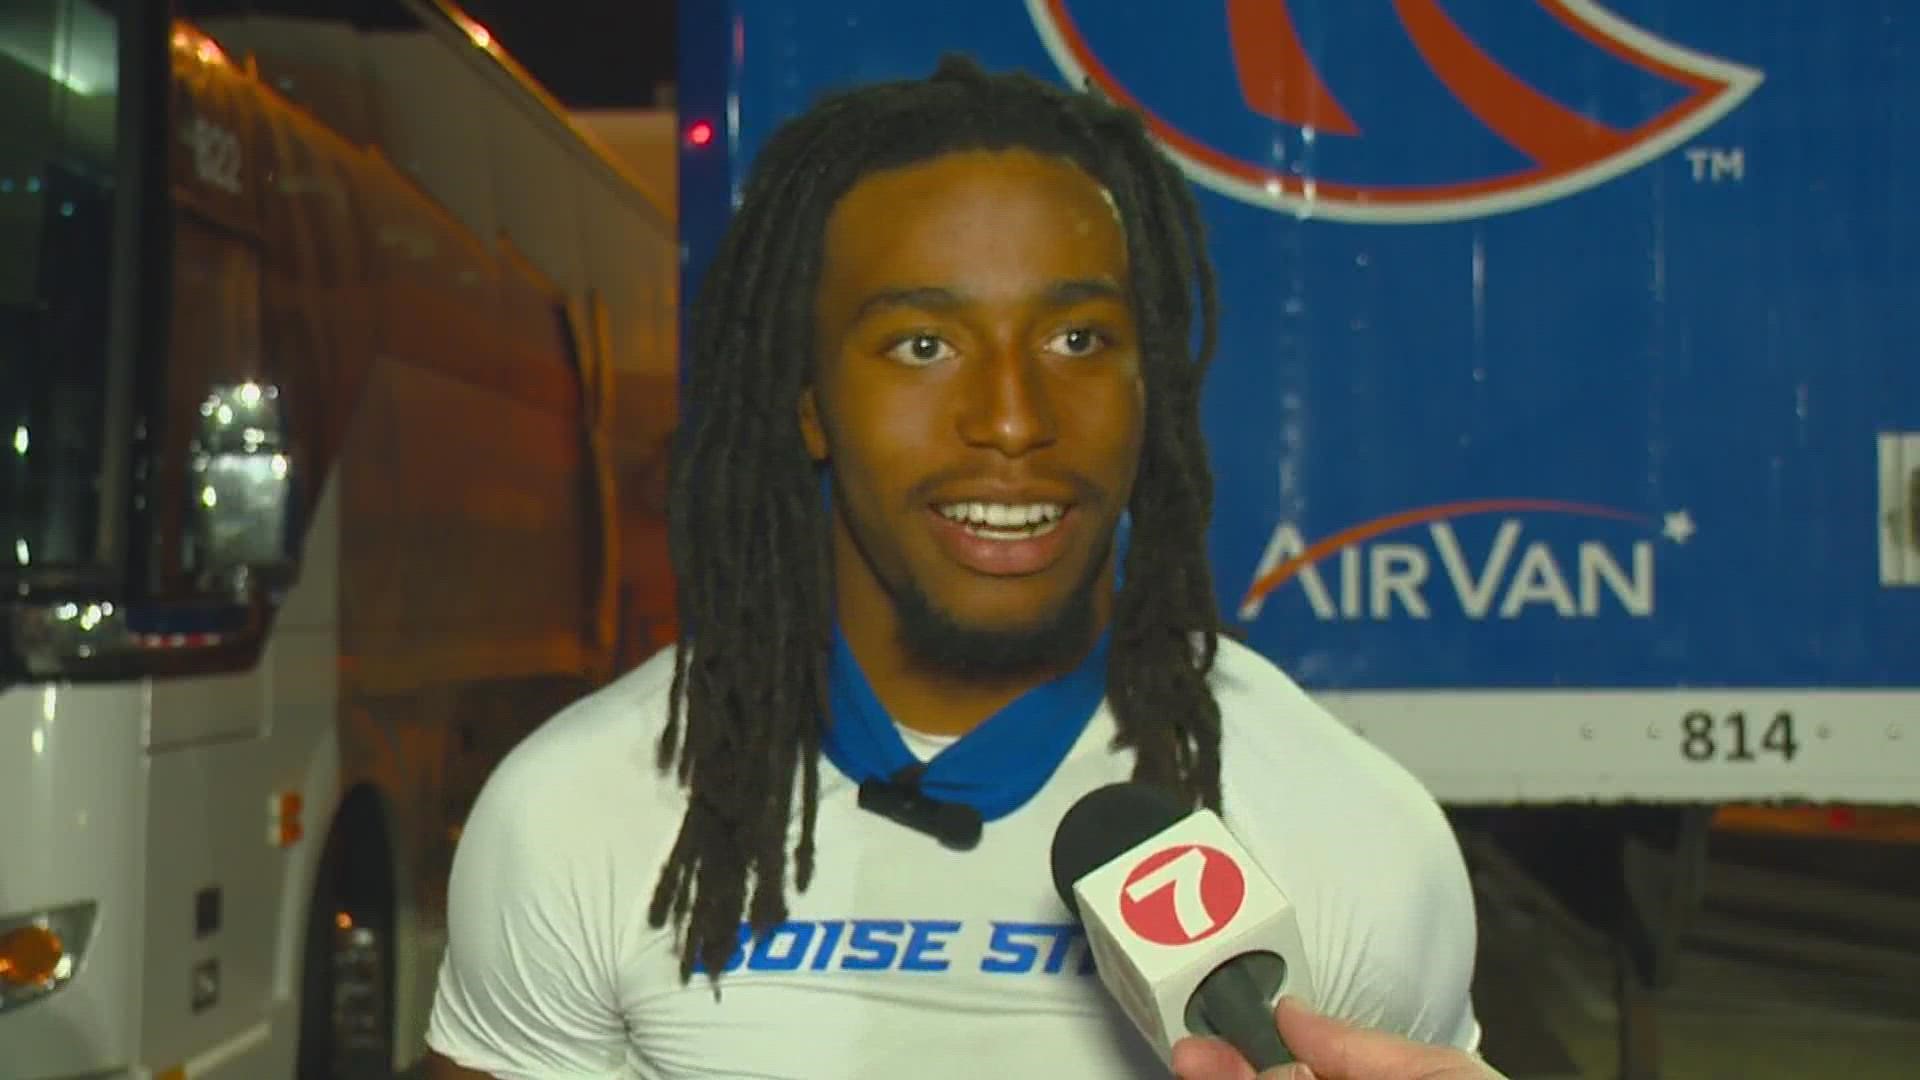 Caples meets with the media after reeling in two touchdowns in Boise State's 31-14 win over New Mexico Friday night.